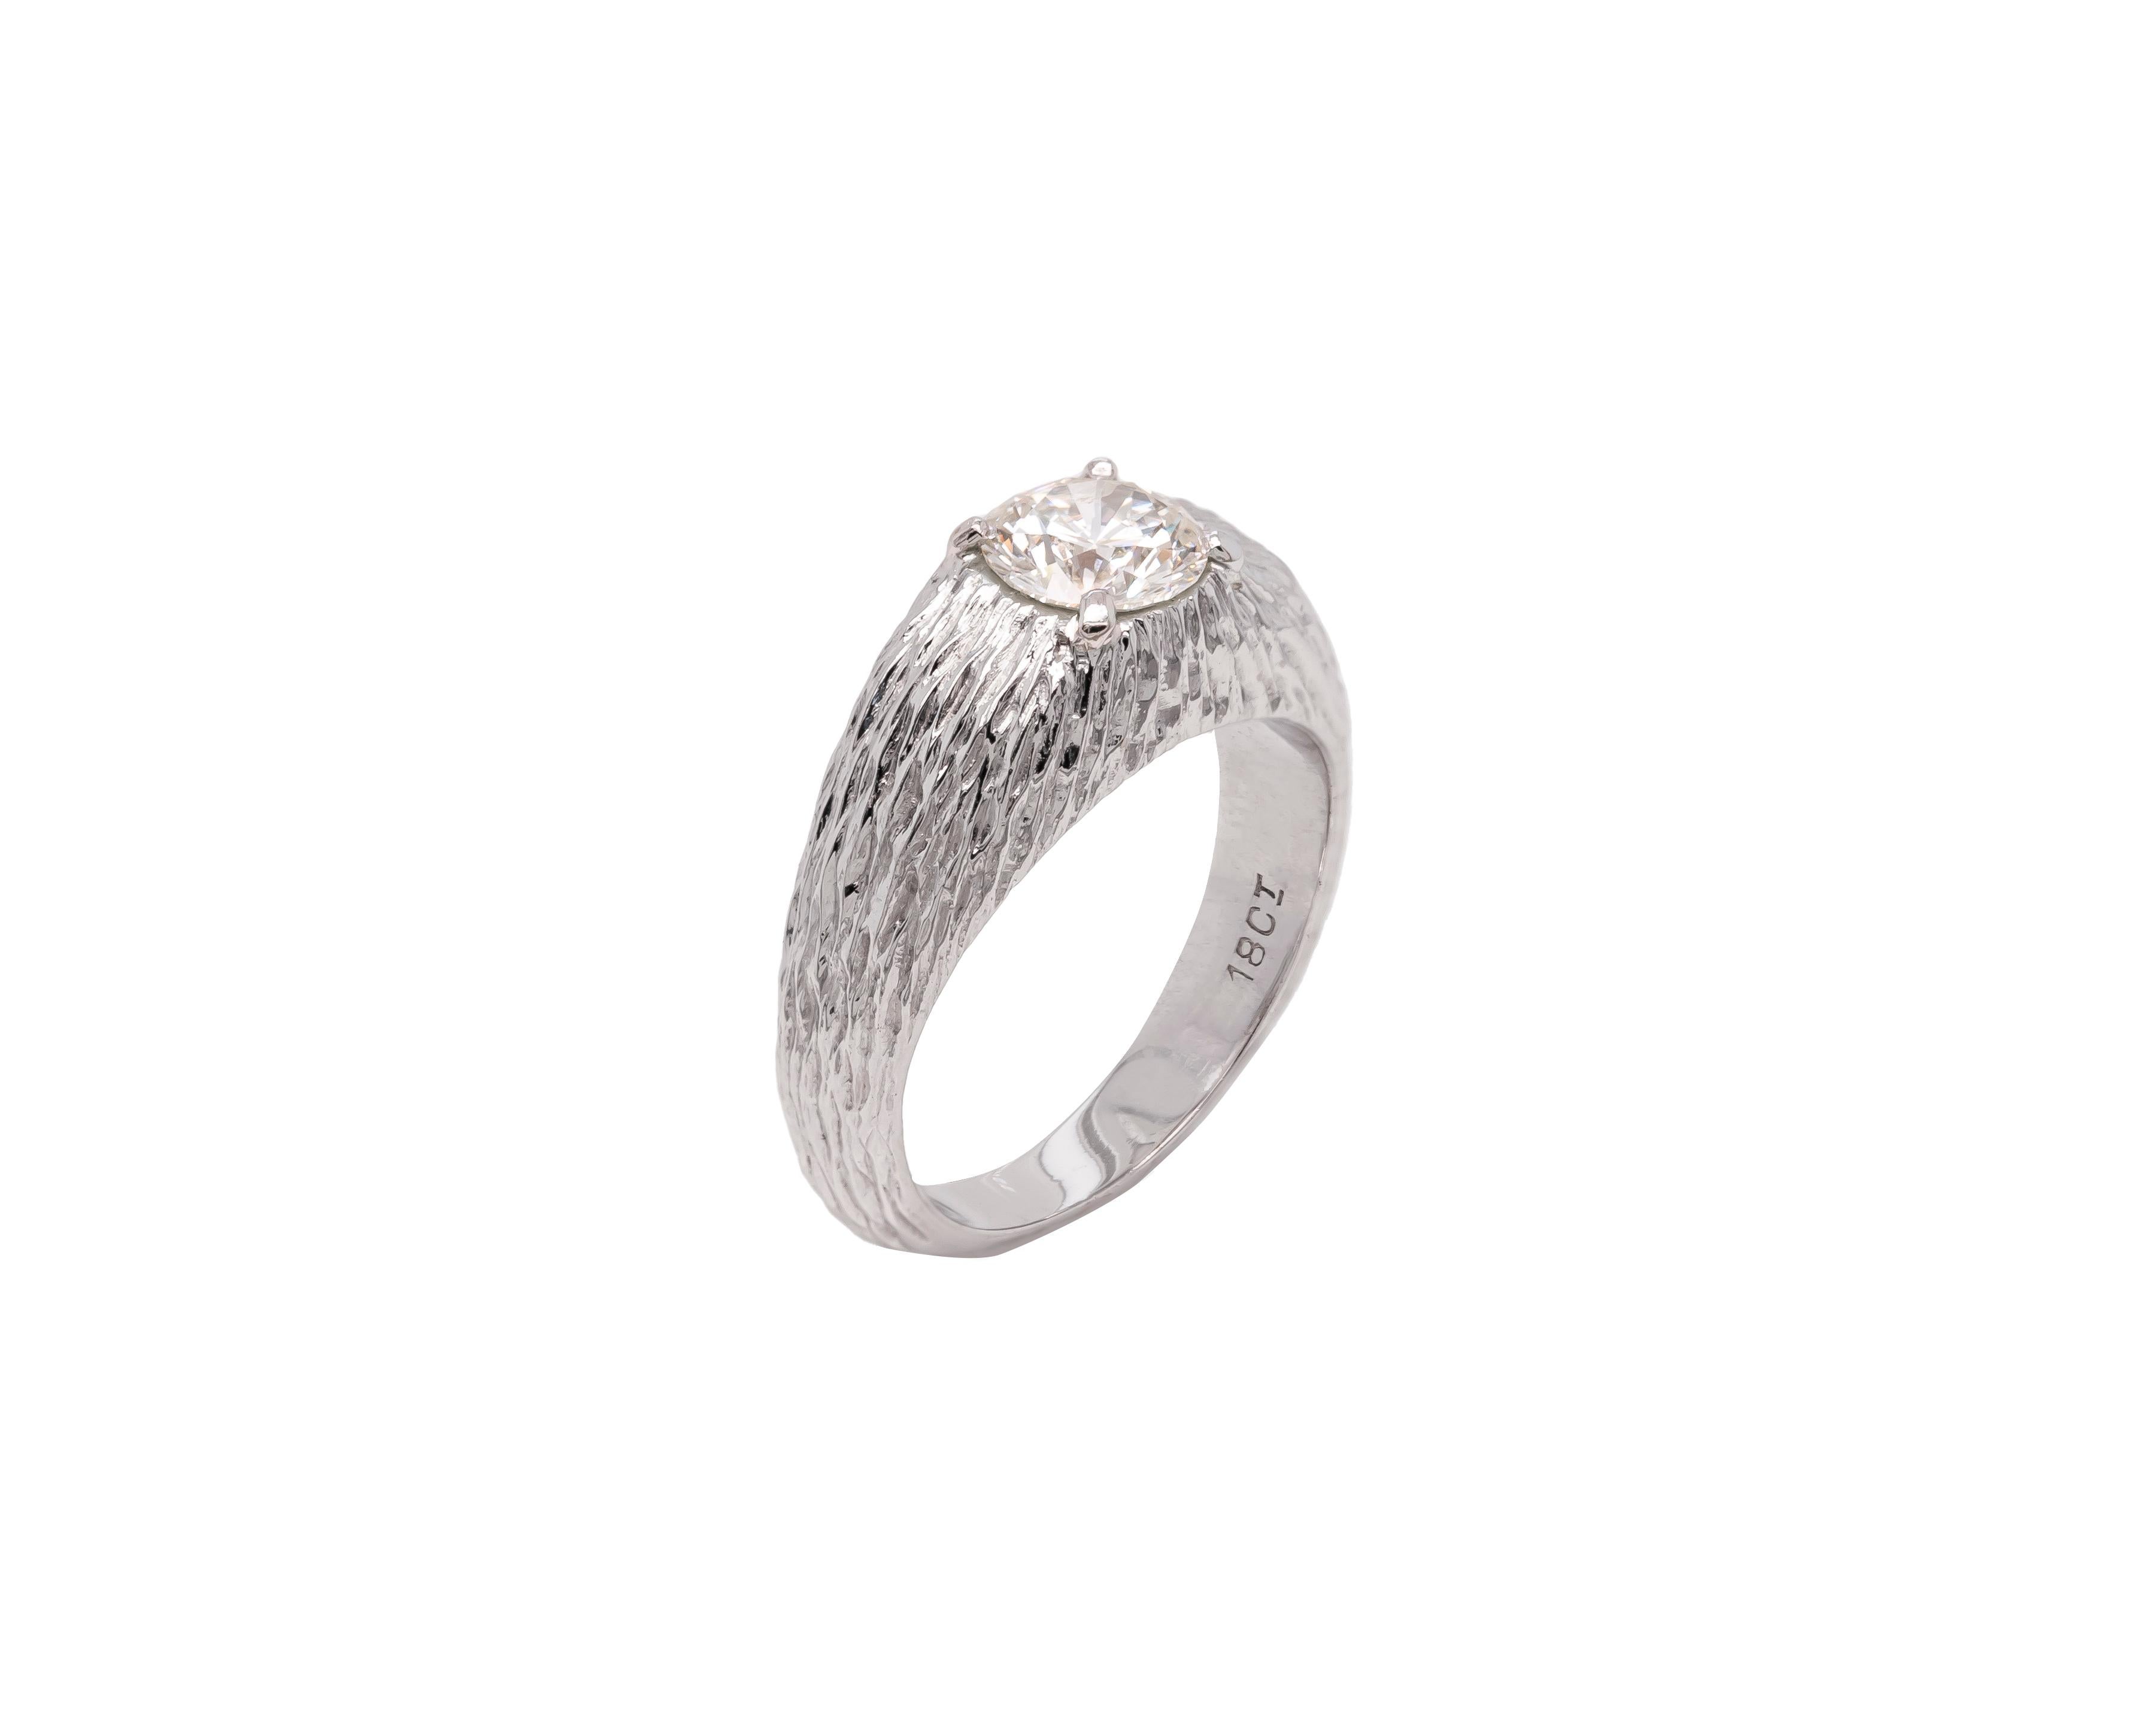 A gorgeous gents gypsy ring featuring a beautiful 1.04ct round brilliant cut diamond mounted in a four claw, open back setting. The solitaire stone is perfectly complemented by a rounded tapered shank crafted from 18 carat white gold with a textured